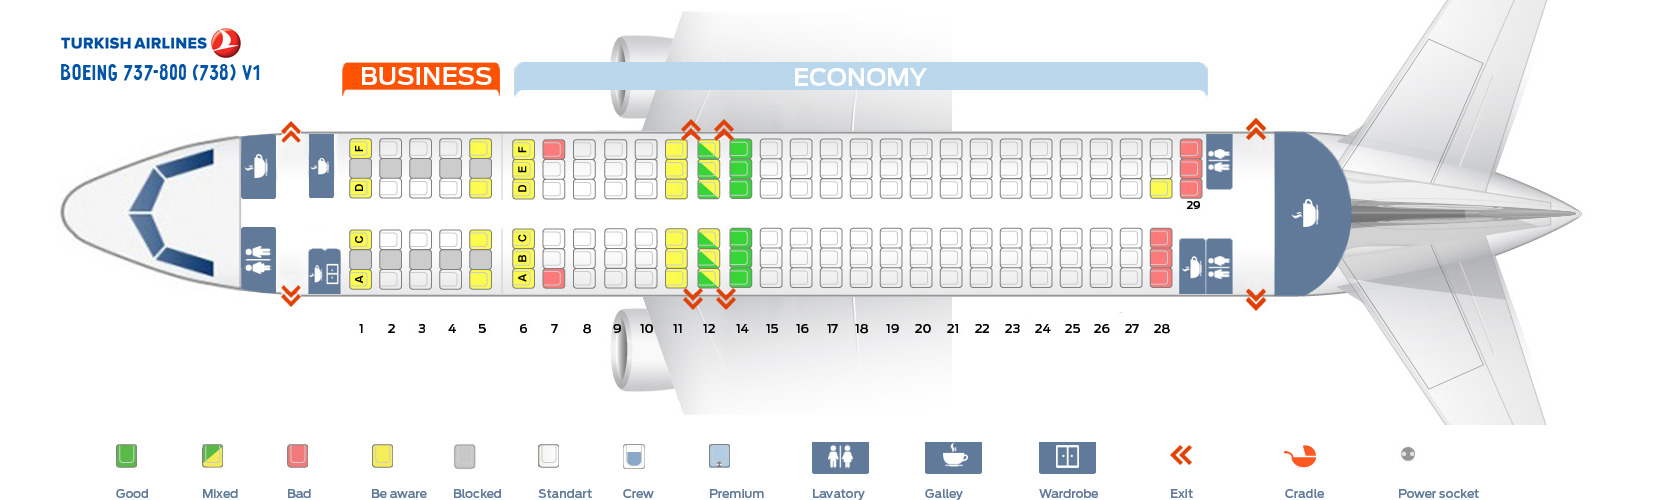 Alaska Airlines 738 Seating Chart